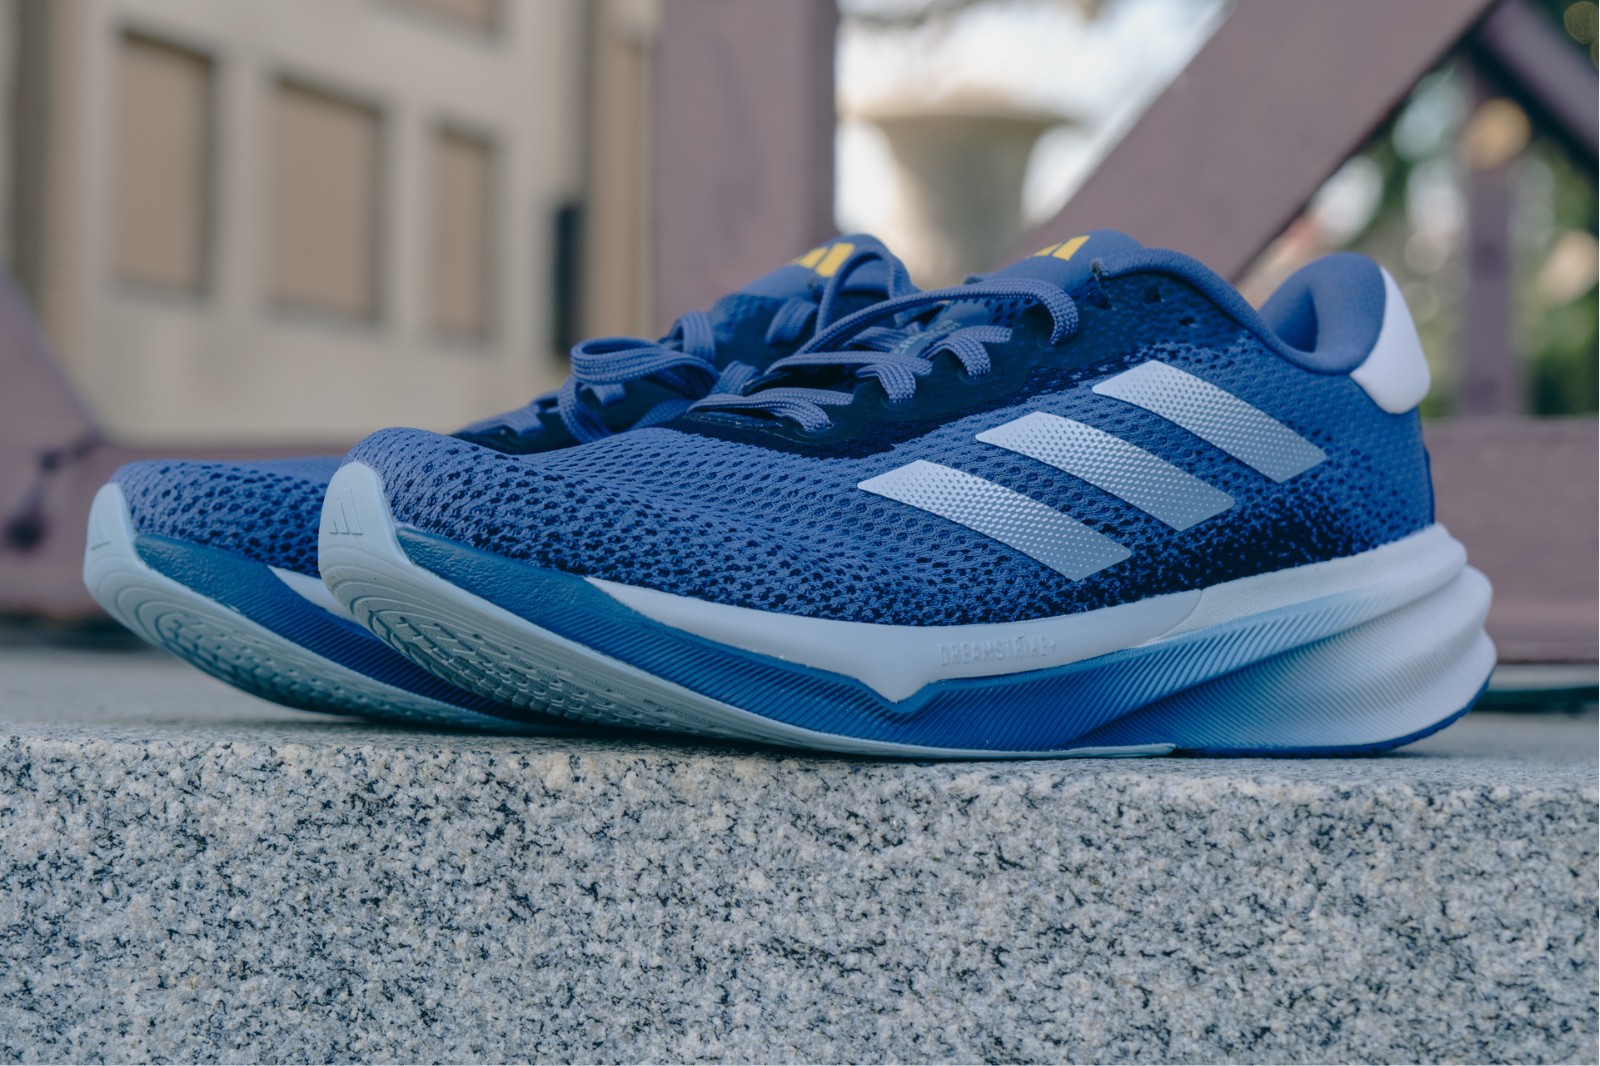 Adidas Supernova Stride Review: Basics on a Budget - Believe in the Run